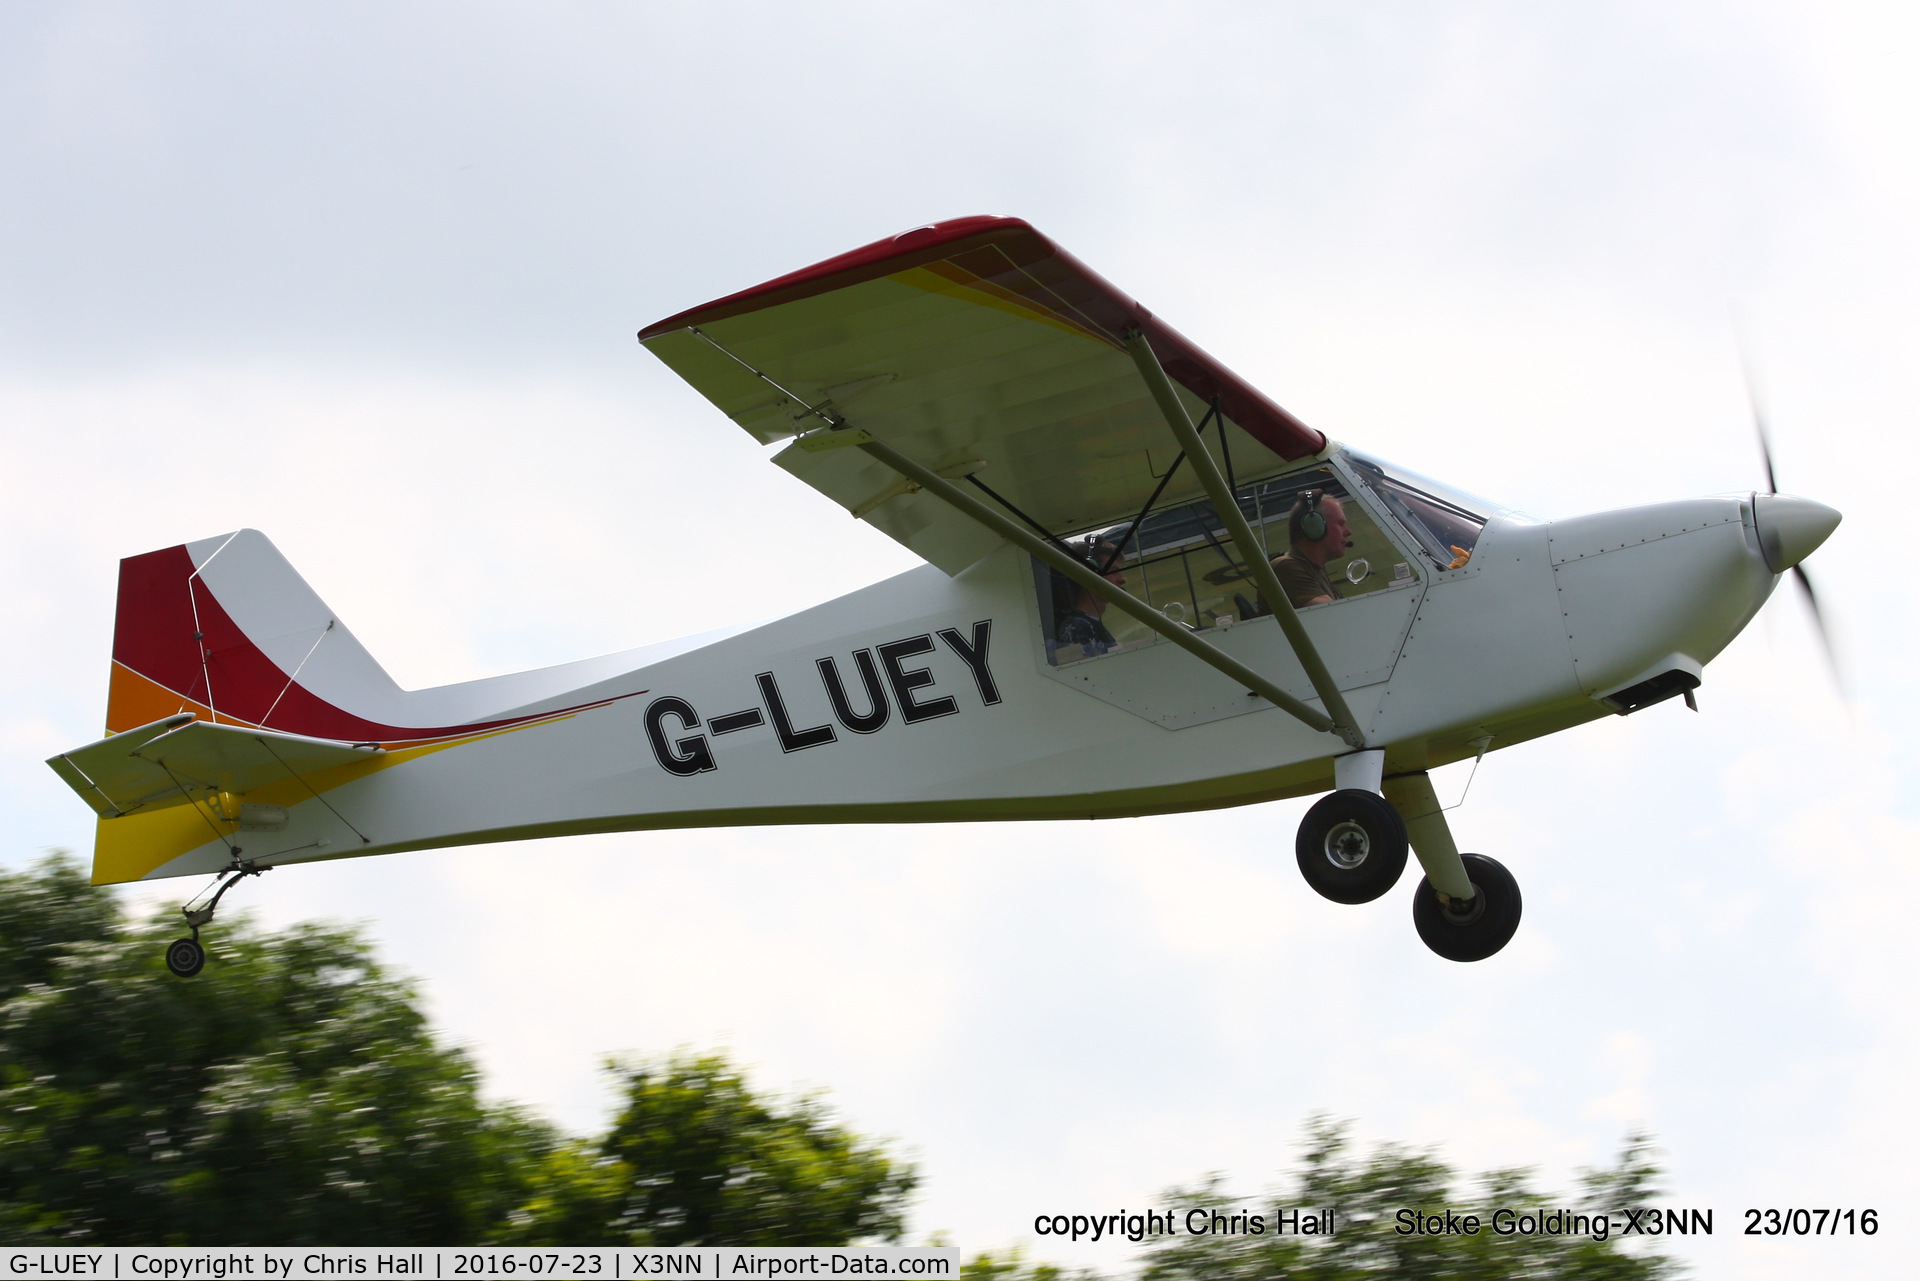 G-LUEY, 2010 Rans S-7S Courier C/N LAA 218-14772, Stoke Golding Stakeout 2016